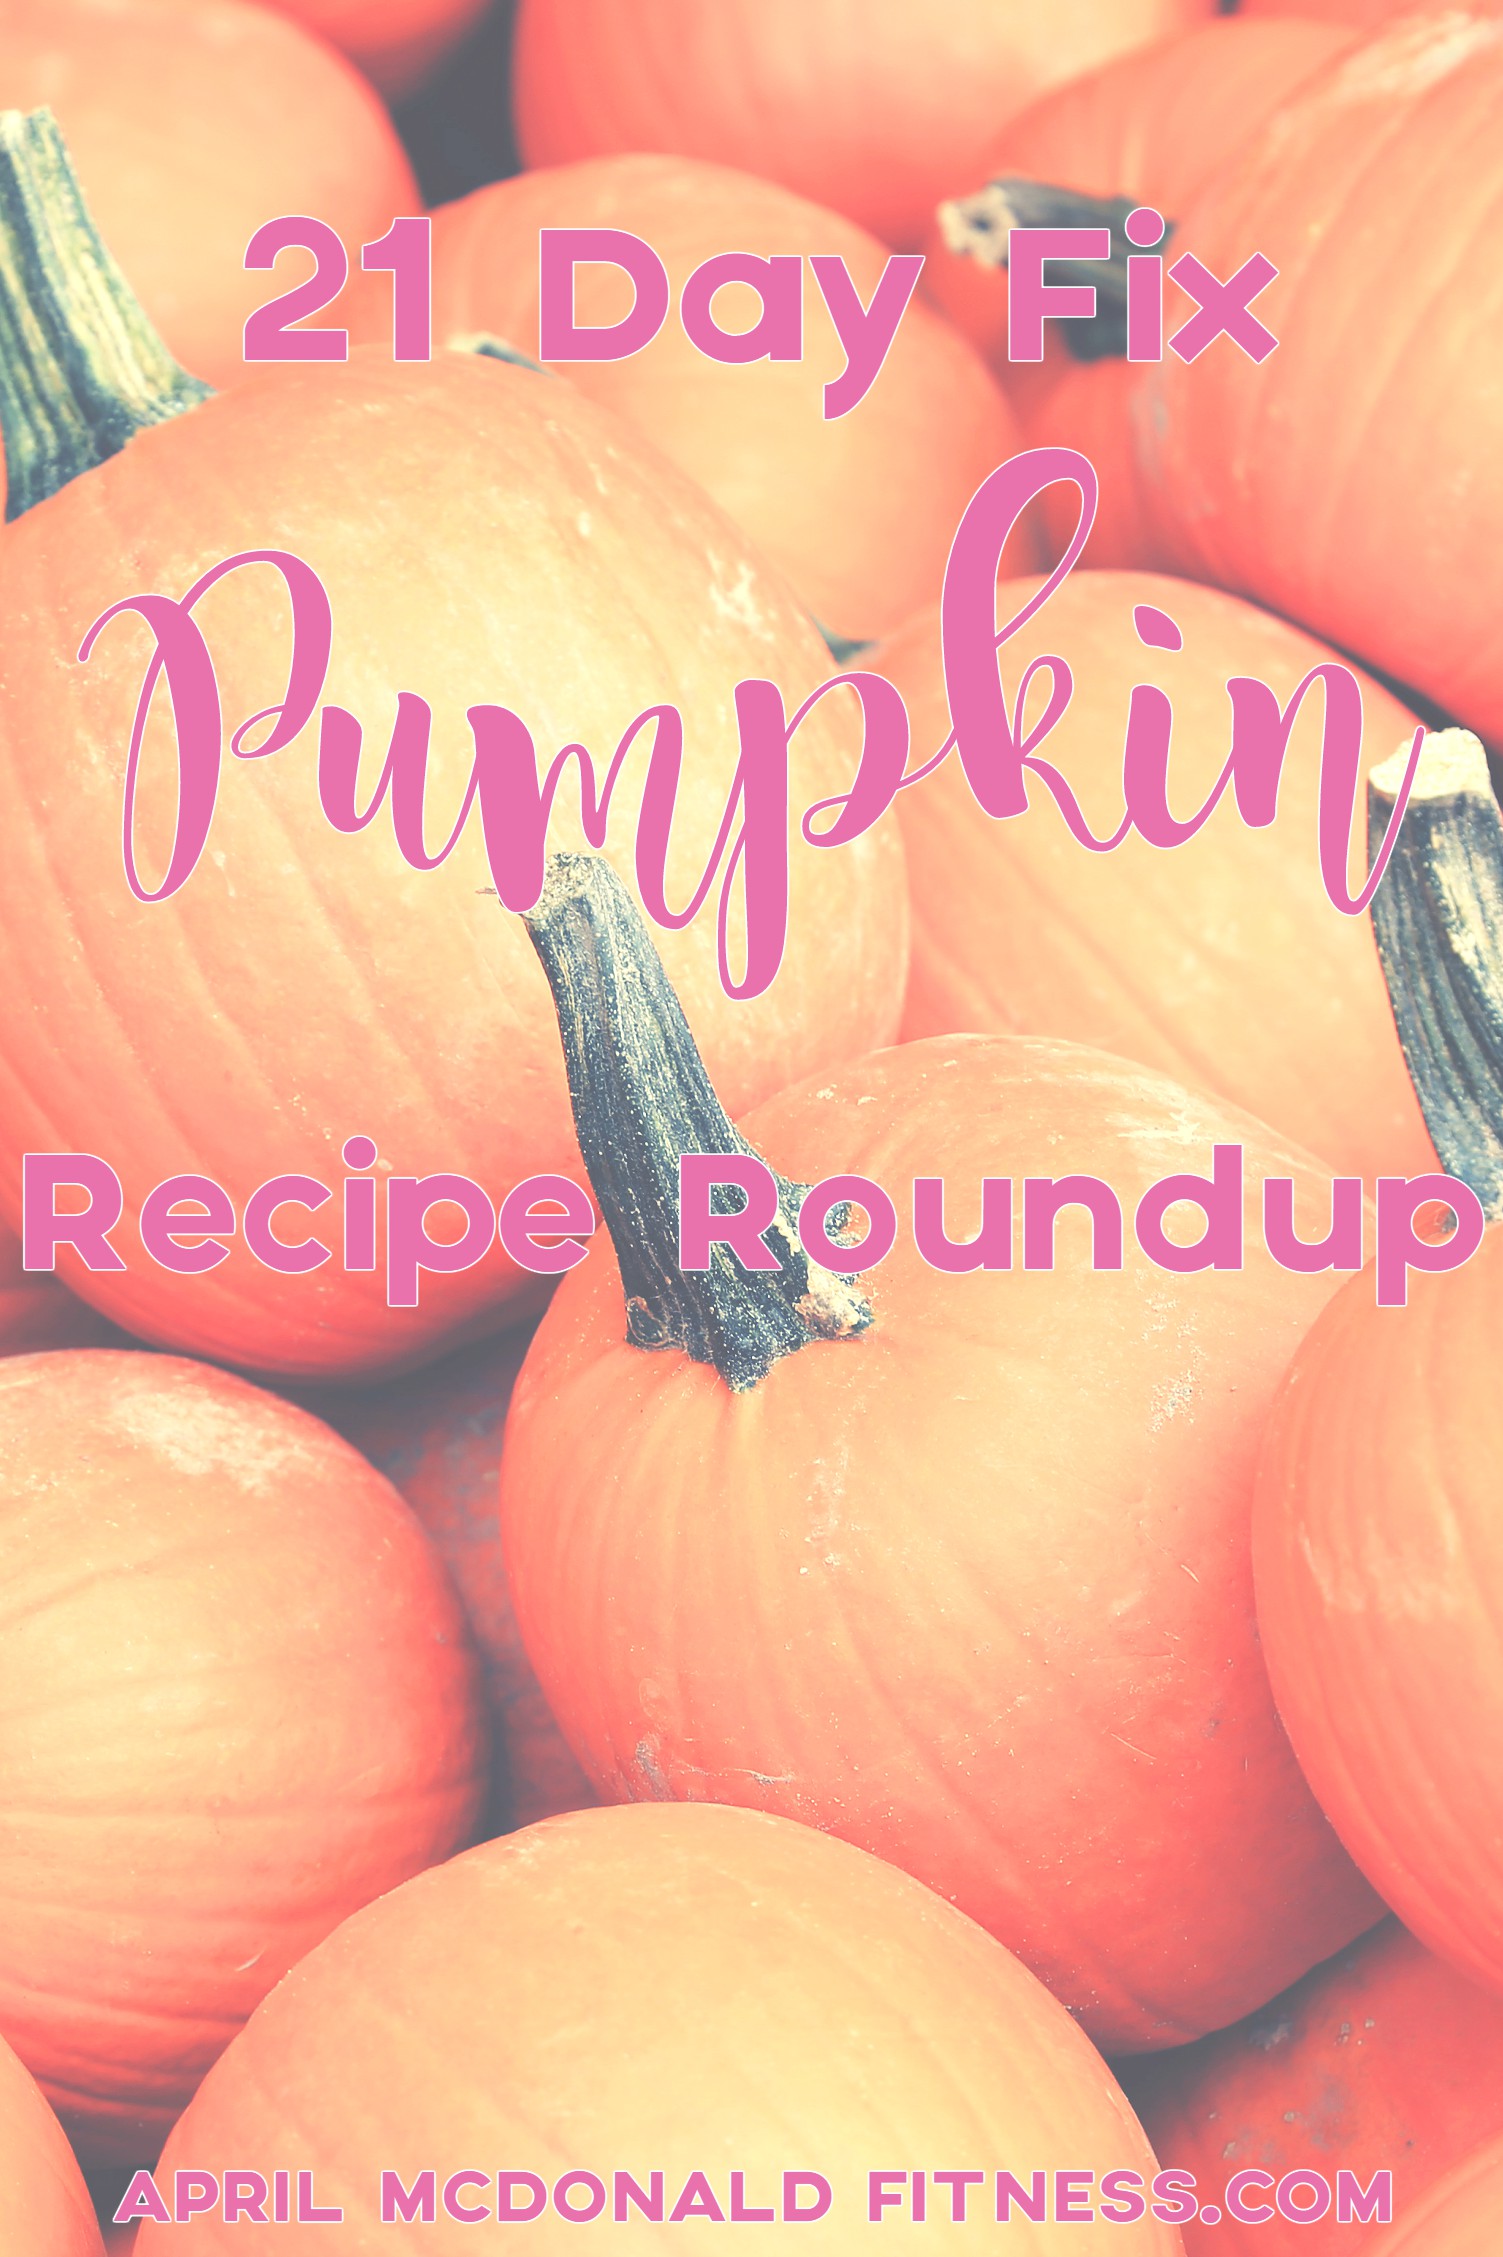 What can you do with all that leftover pumpkin from Halloween? Use it of course! Click here for many ideas on recipes featuring pumpkin that are Beach Body 21 Day Fix approved!